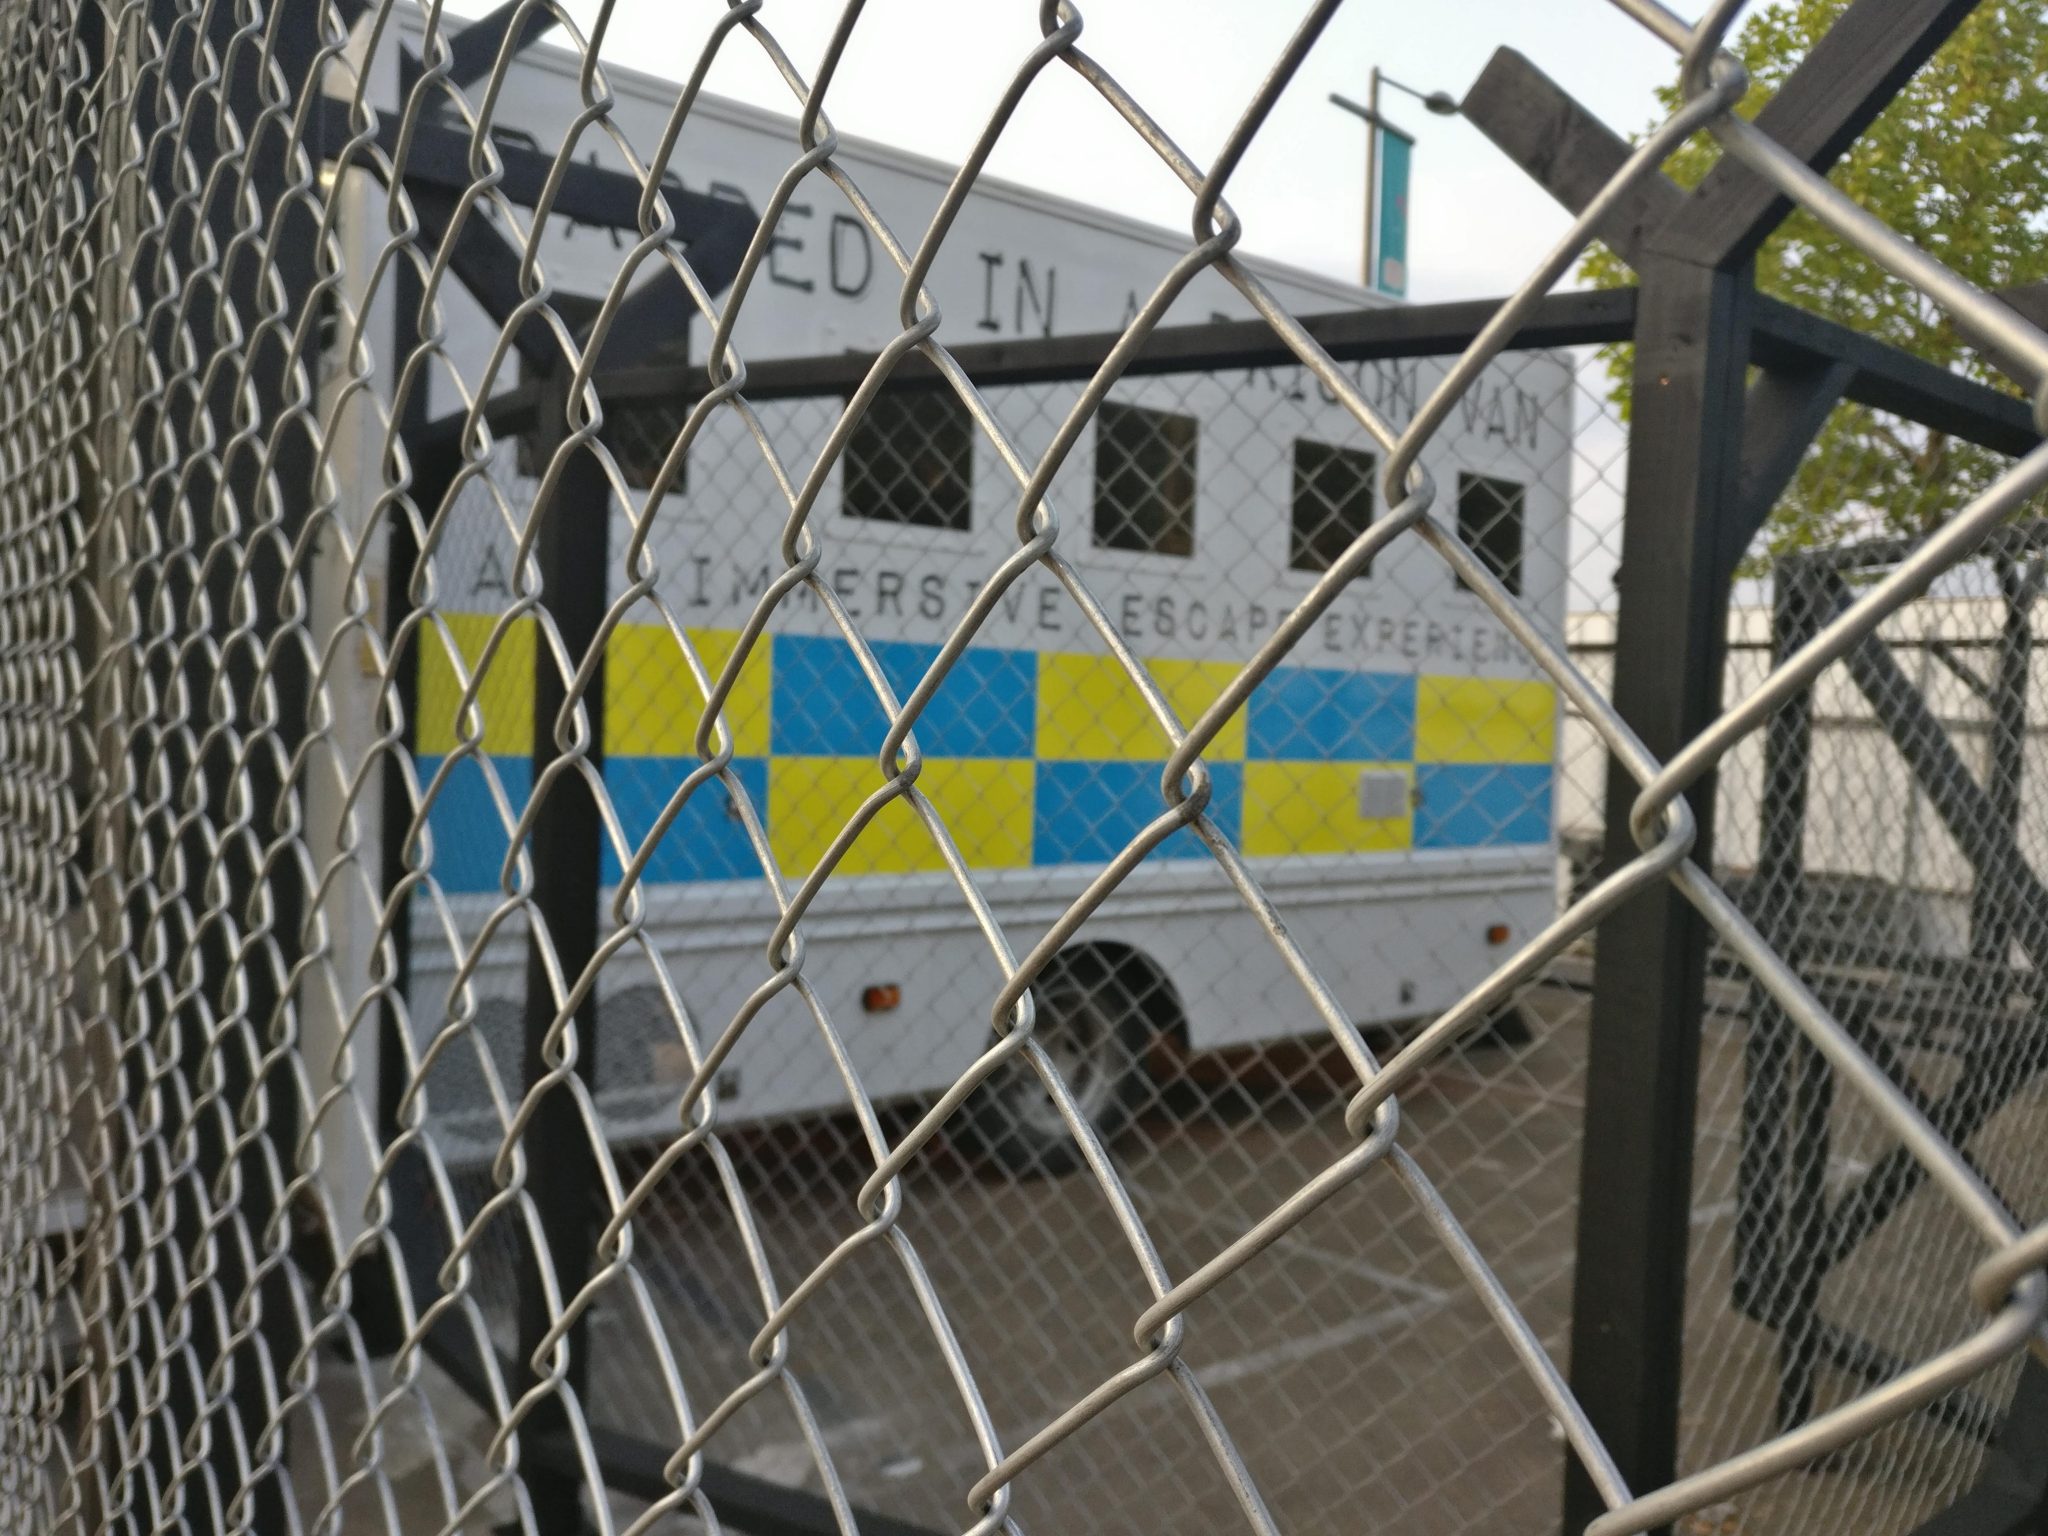 The prison van behind the chain-link fence